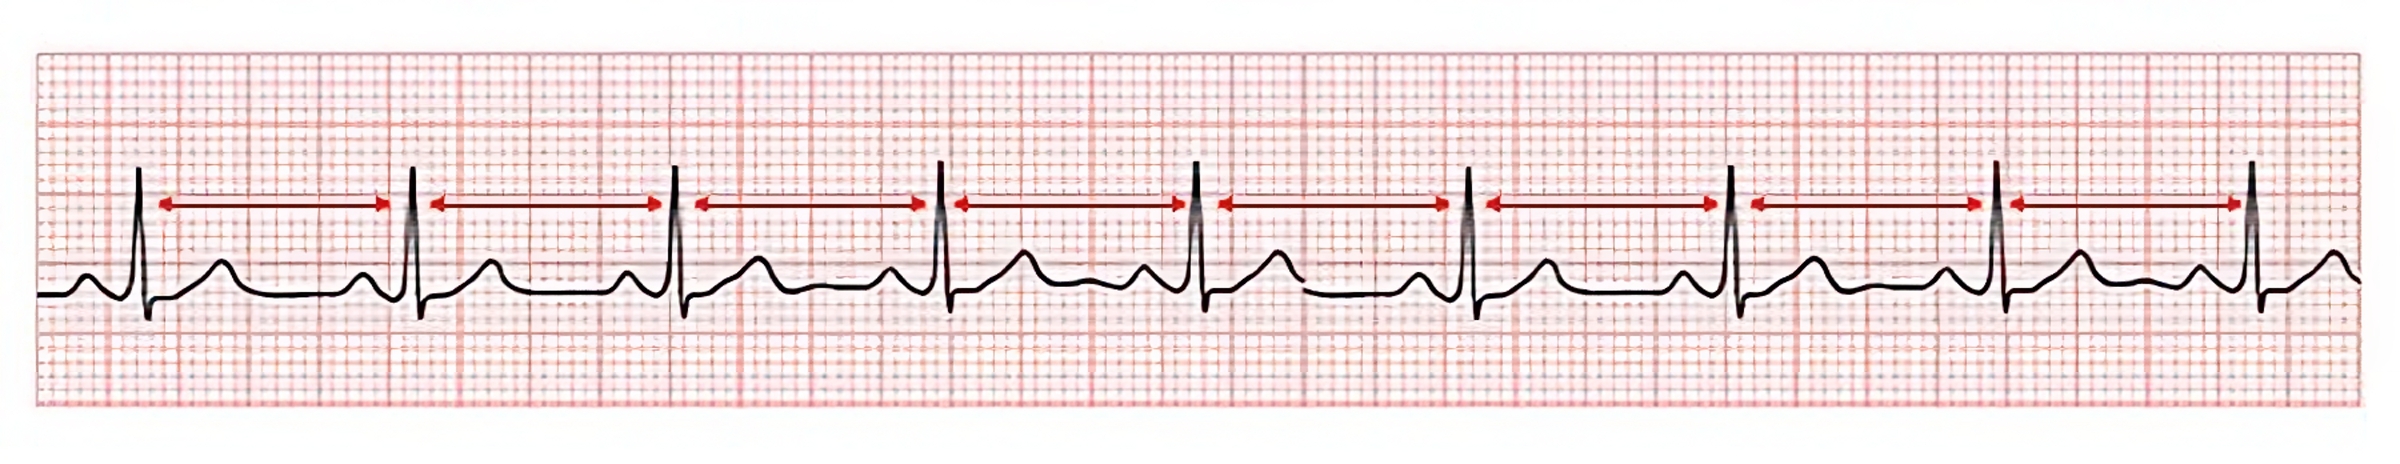 Image of ecg strip, with arrows, to demonstrate Assessing the R to R Distance